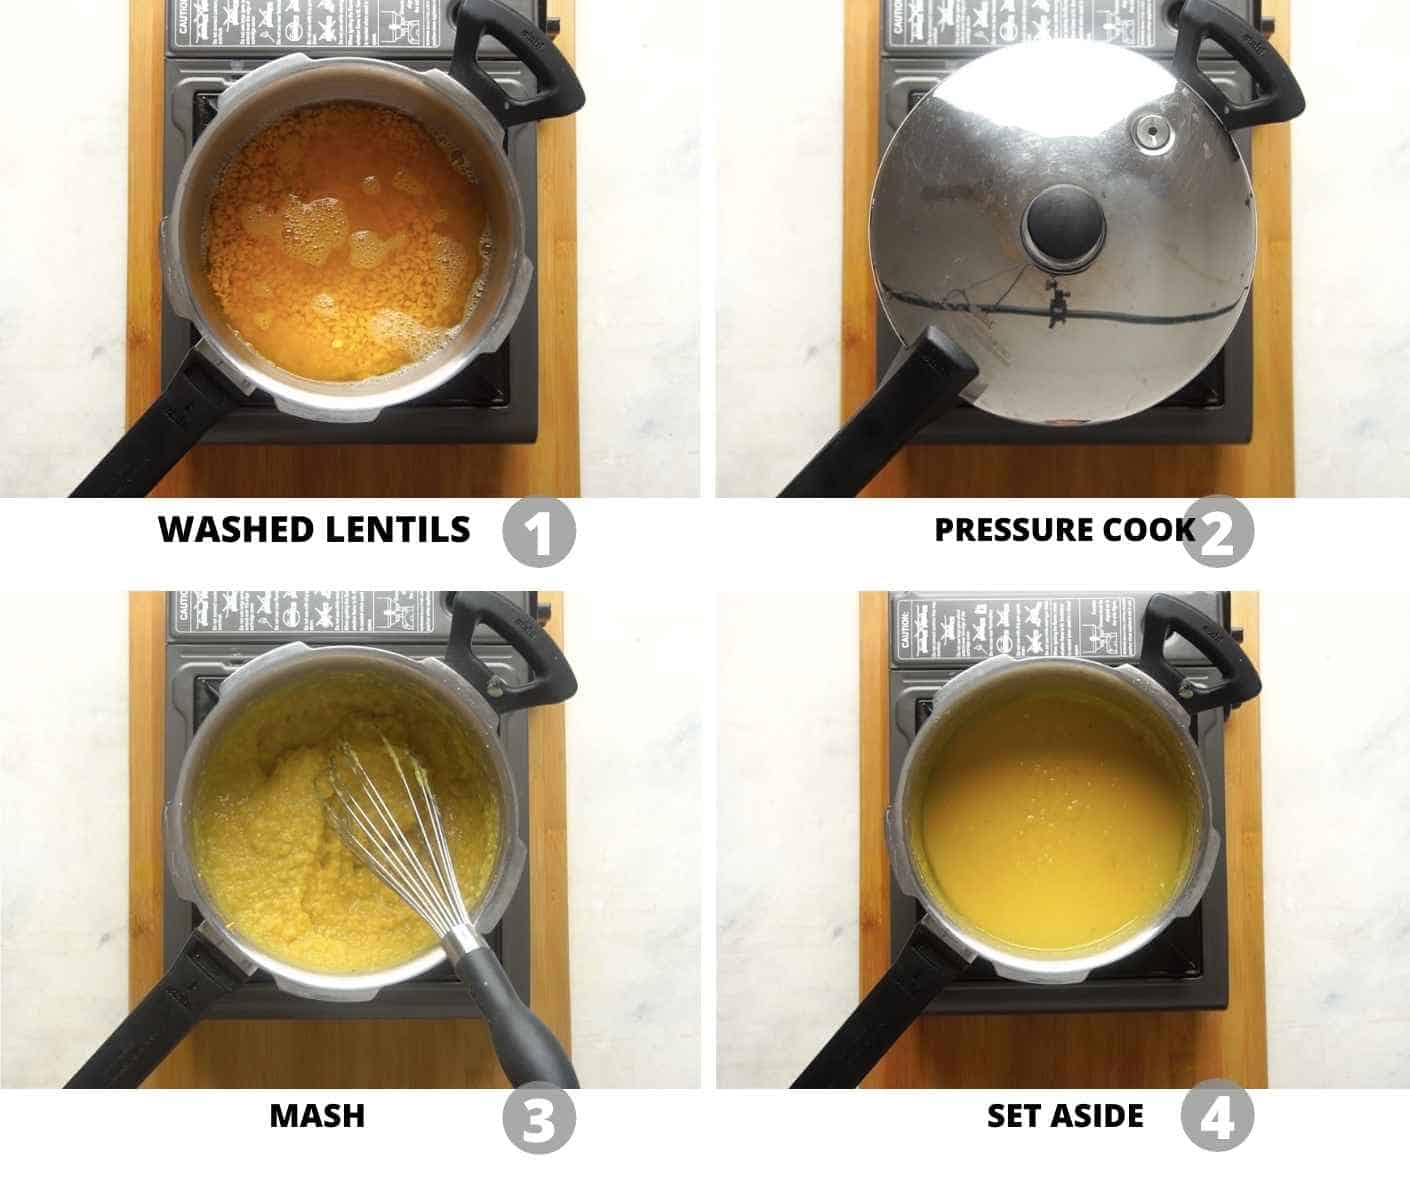 Step by step pictures showing how to pressure cook dal for dal tadka